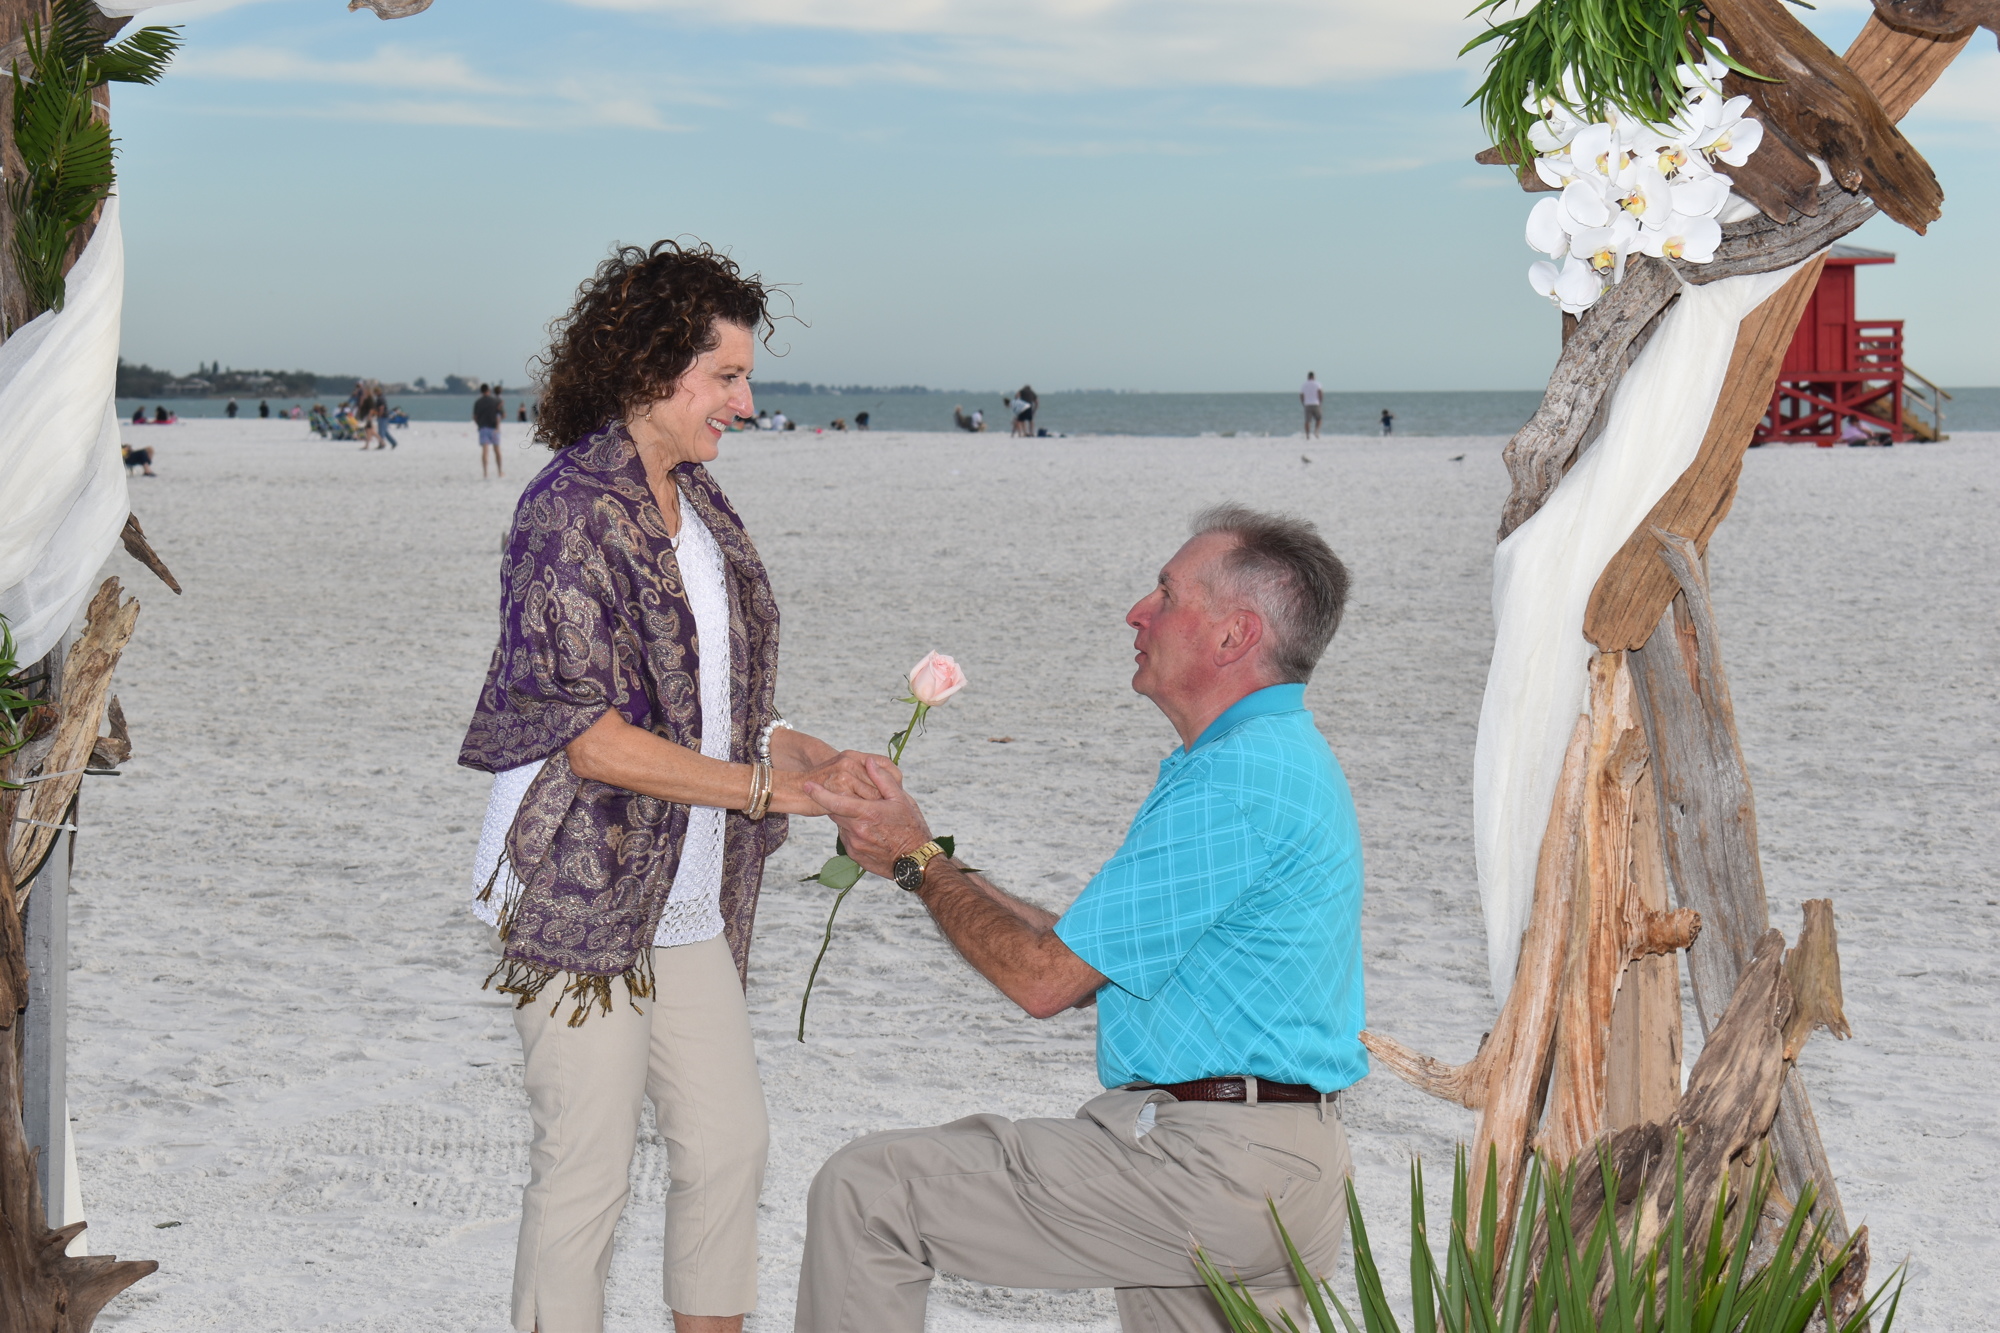 About 400 couples renewed their vows on Siesta Beach on Feb. 14.